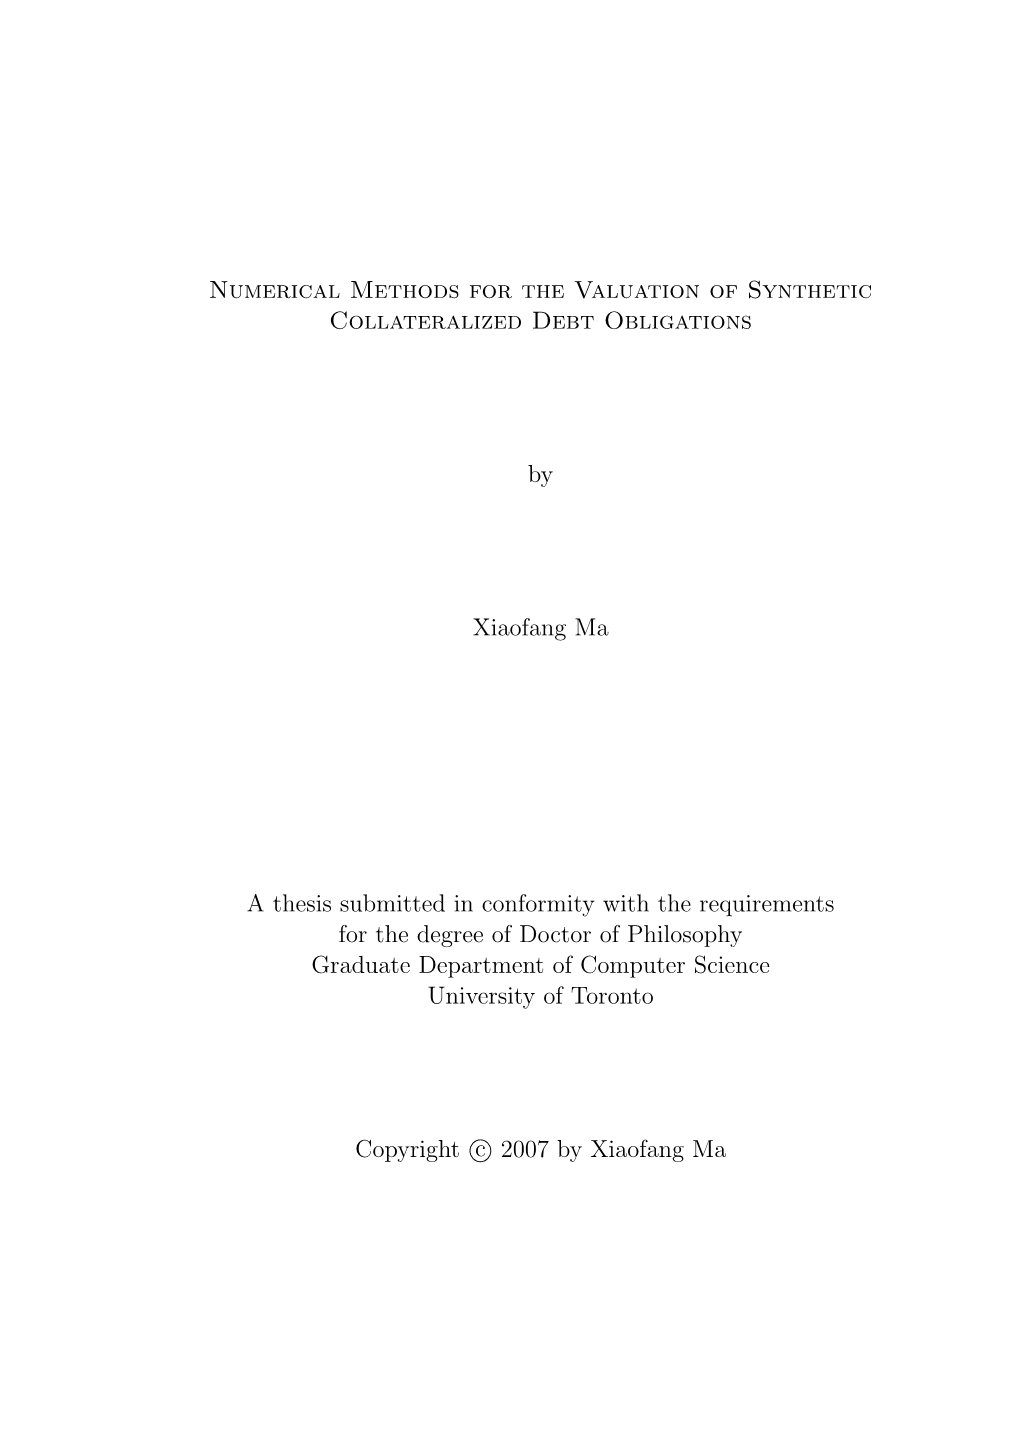 Numerical Methods for the Valuation of Synthetic Collateralized Debt Obligations